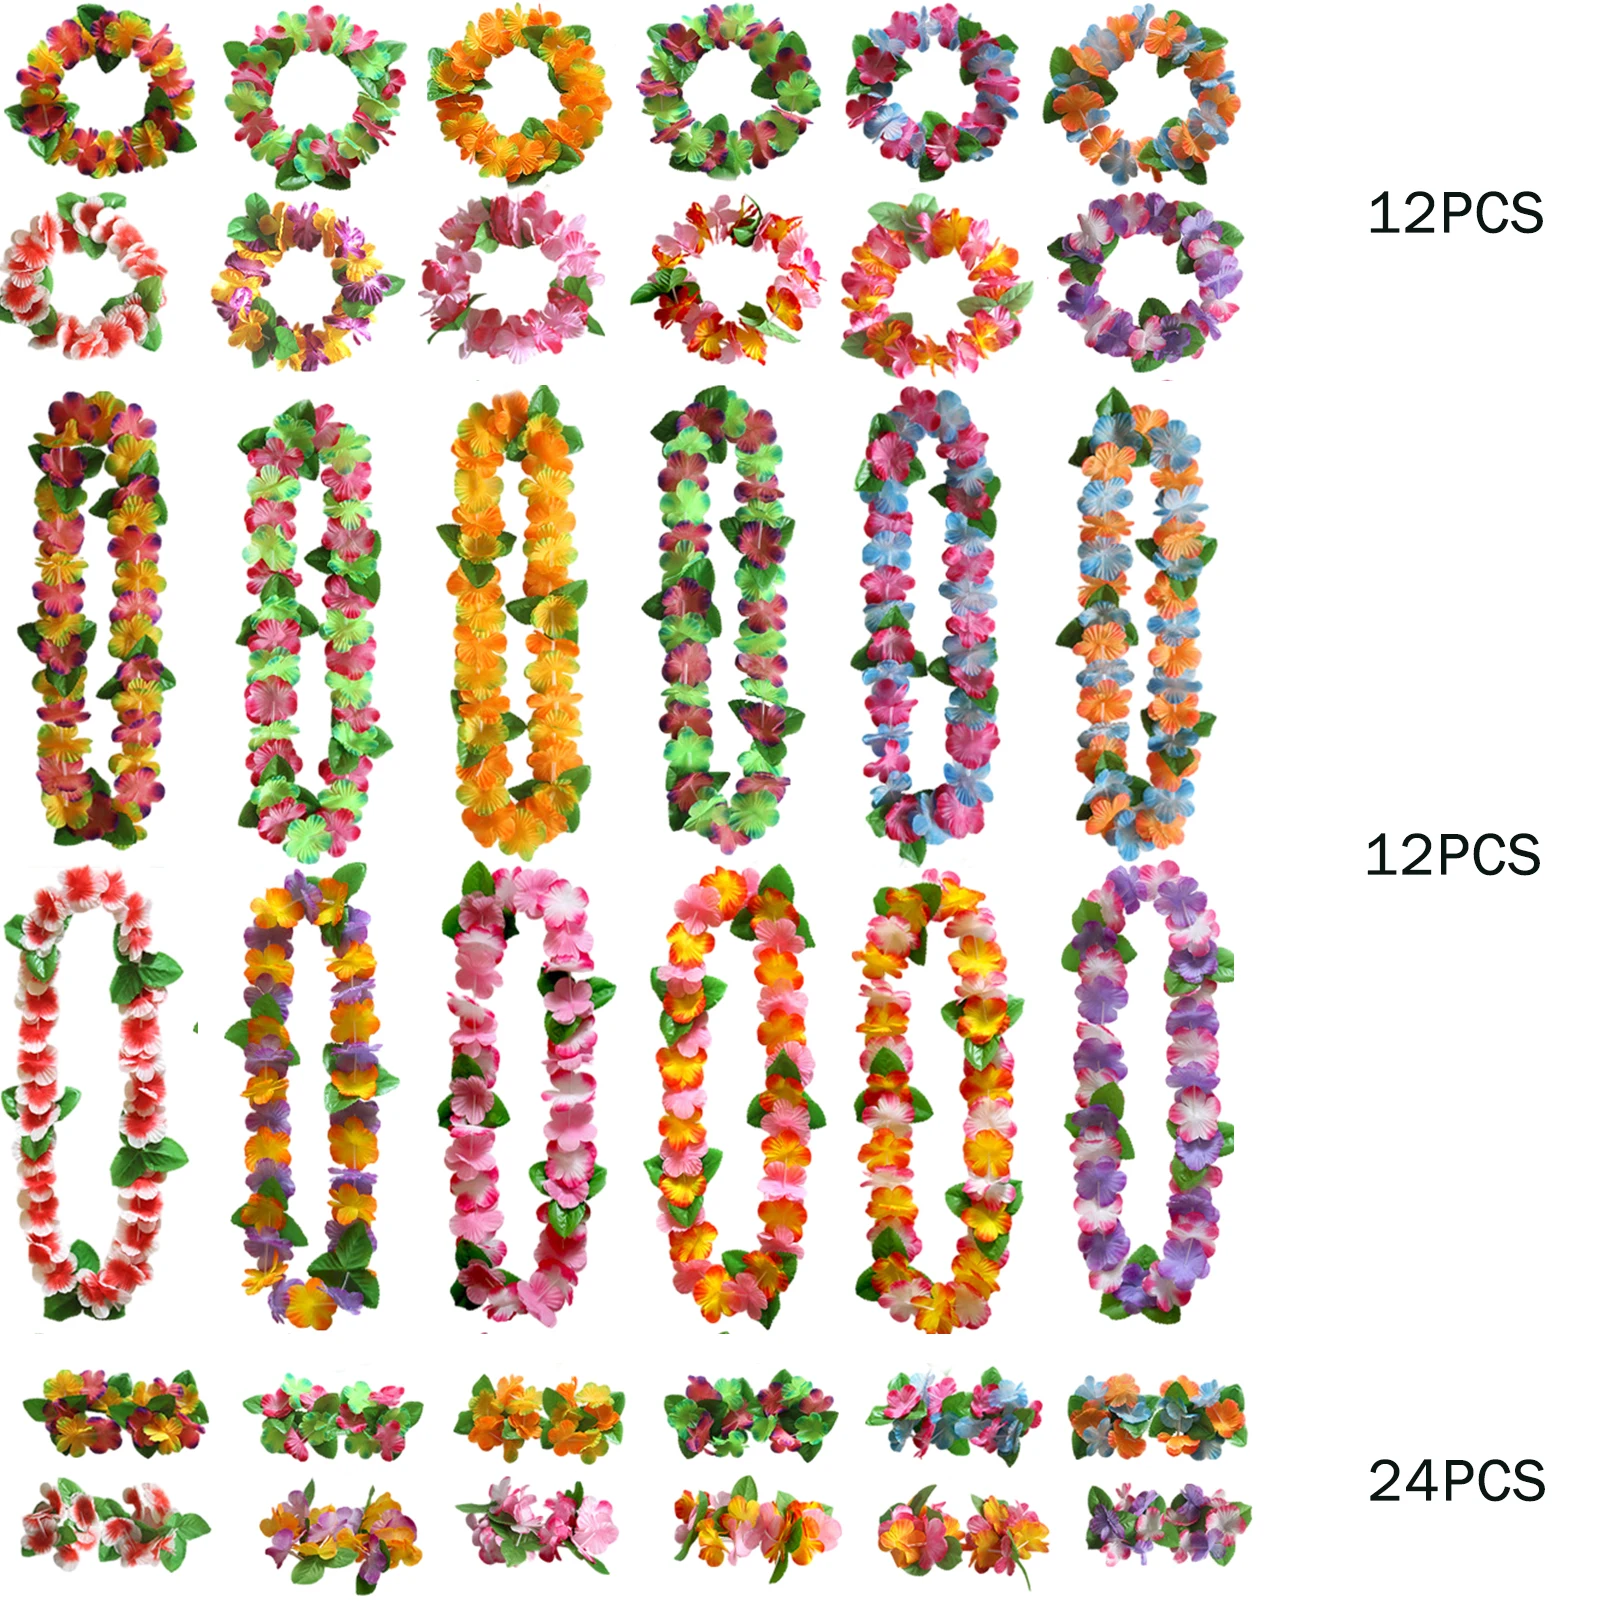 

48pcs Garland Necklace Cloth Chains Colorful Party Decorations Beach Outfit Wreath Pendant Hawaiian Lei Headband Artificial